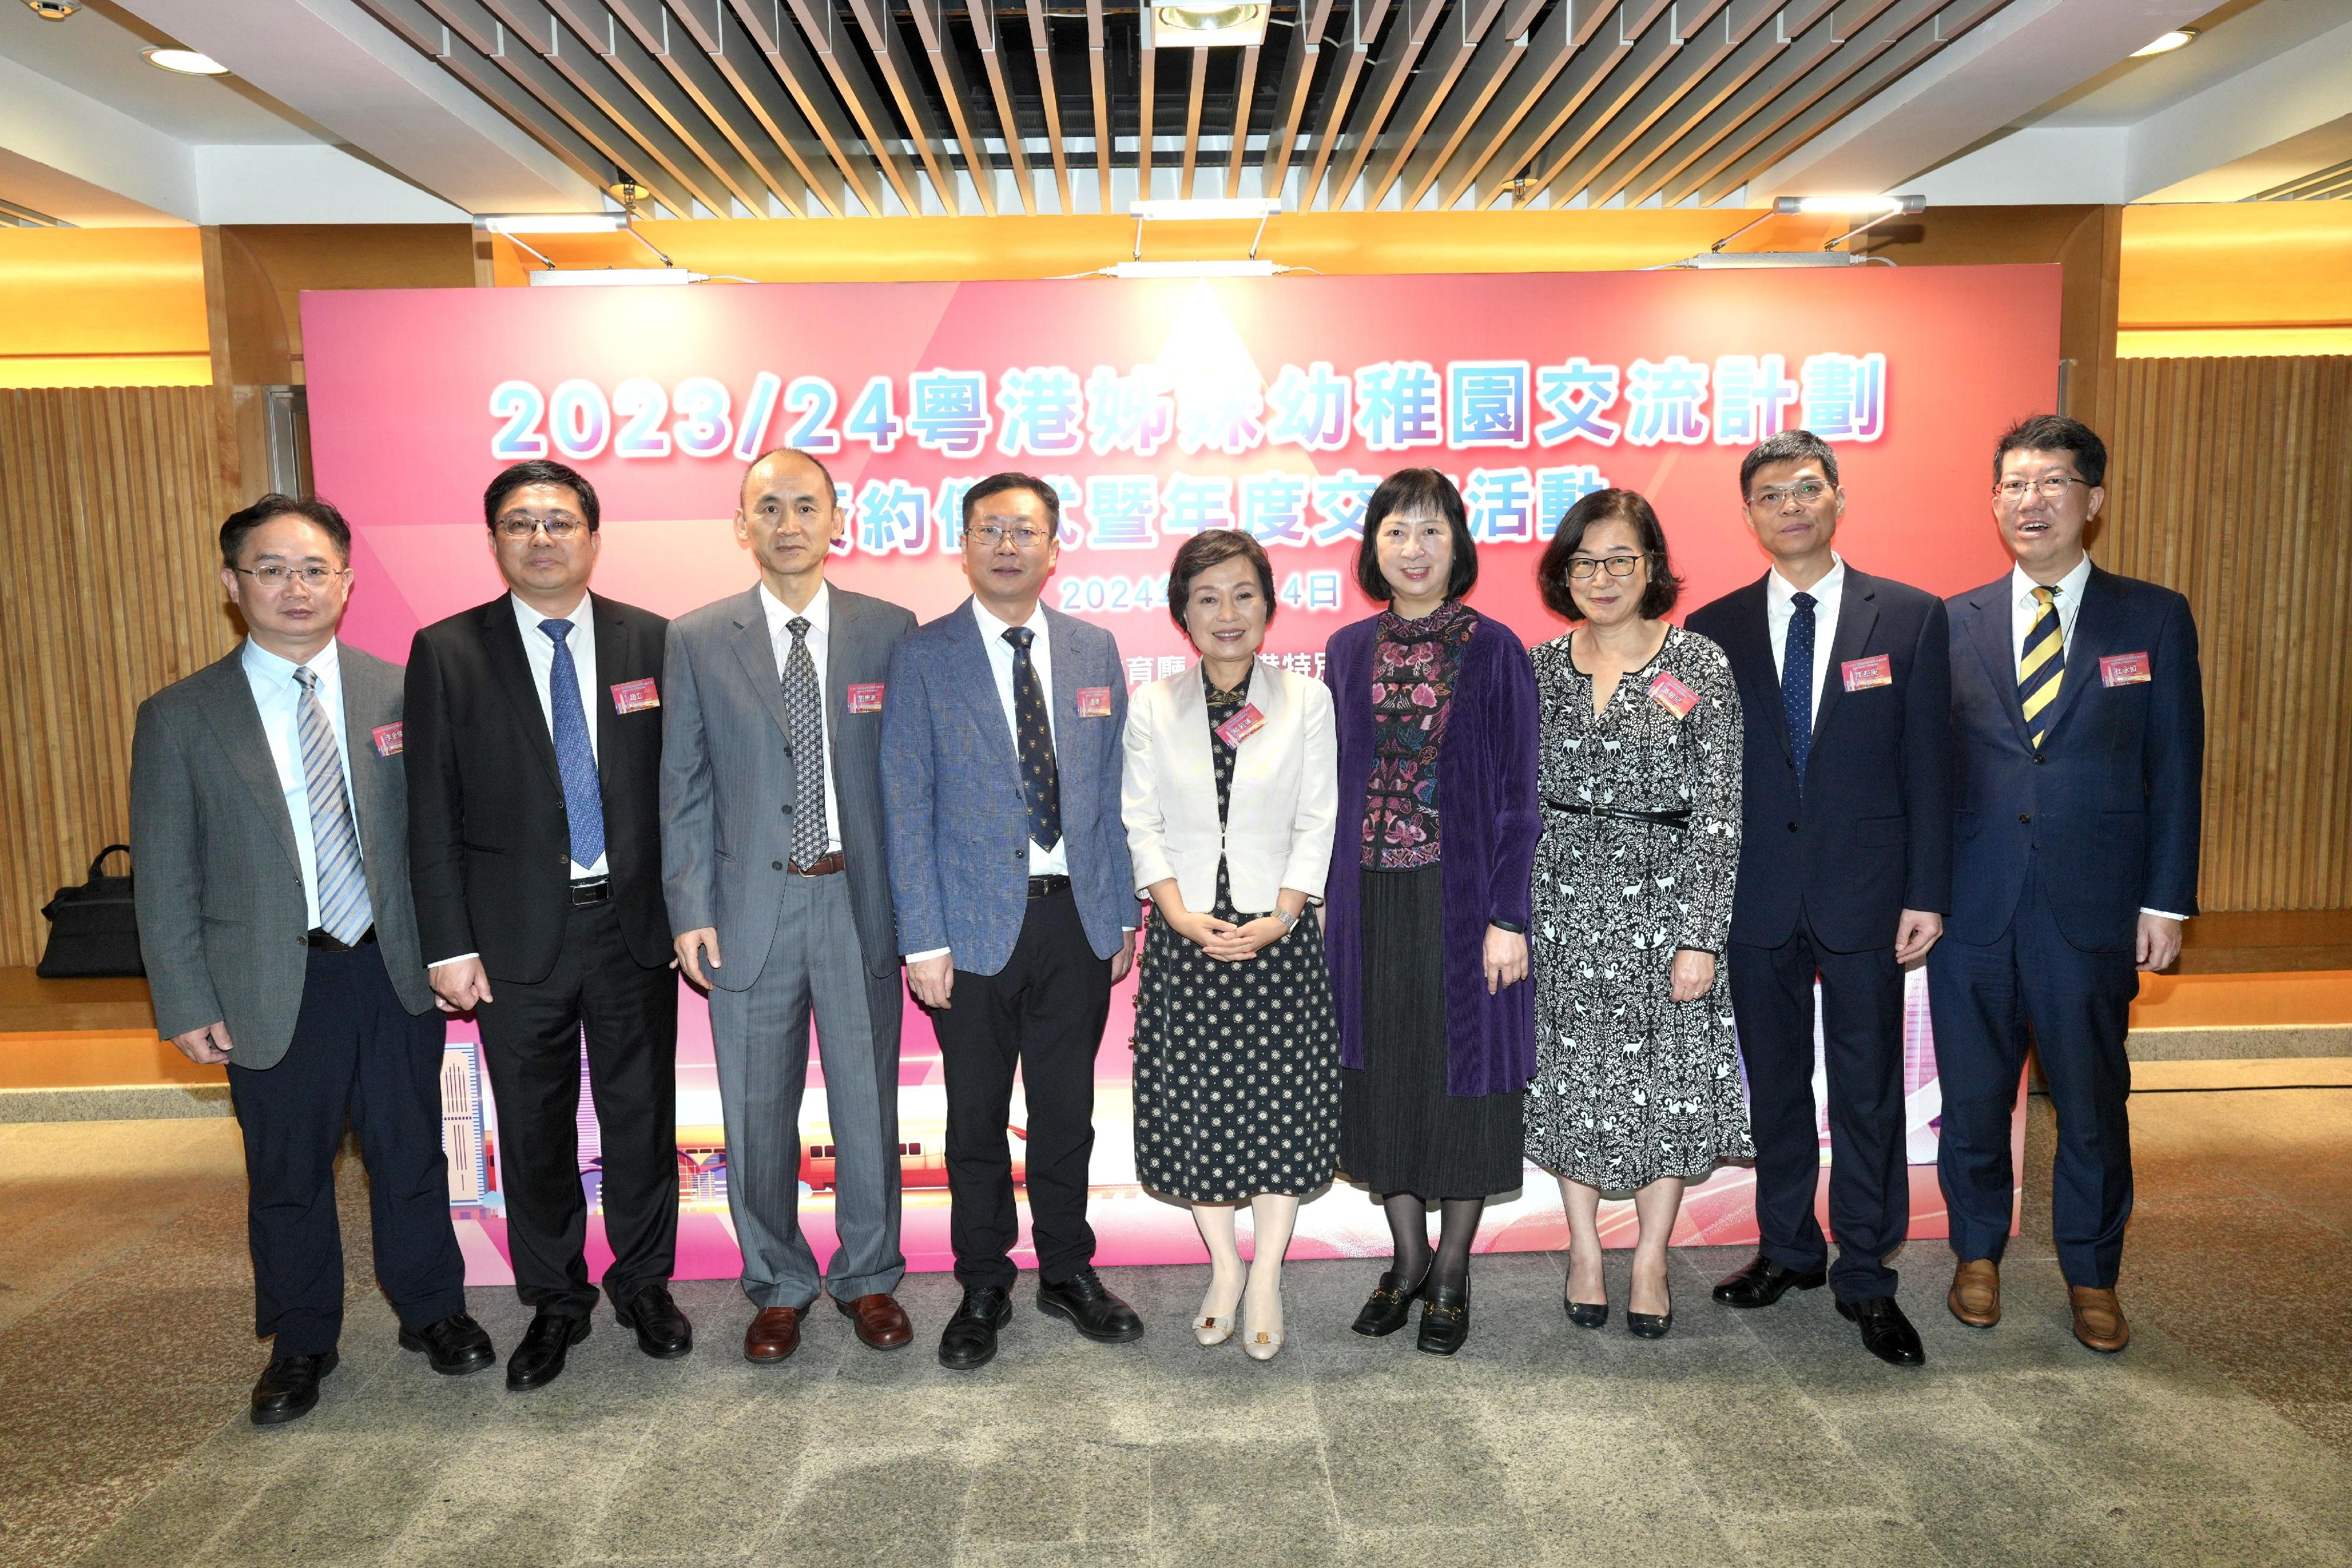 The Secretary for Education, Dr Choi Yuk-lin (centre); Deputy Director-General of the Department of Education of Guangdong Province Mr Feng Wei (fourth left); the Permanent Secretary for Education, Ms Michelle Li (fourth right); the First-level Inspector of the Liaison Office of the Central People's Government in the Hong Kong Special Administrative Region, Mr Liu Maozhou (third left); Vice President of the Education University of Hong Kong Ms Sarah Wong (third right); and Deputy Secretary for Education Mr Edward To (first right), attend the Guangdong-Hong Kong Sister Kindergarten Exchange Programme Signing Ceremony and Annual Exchange Activity today (June 14).
